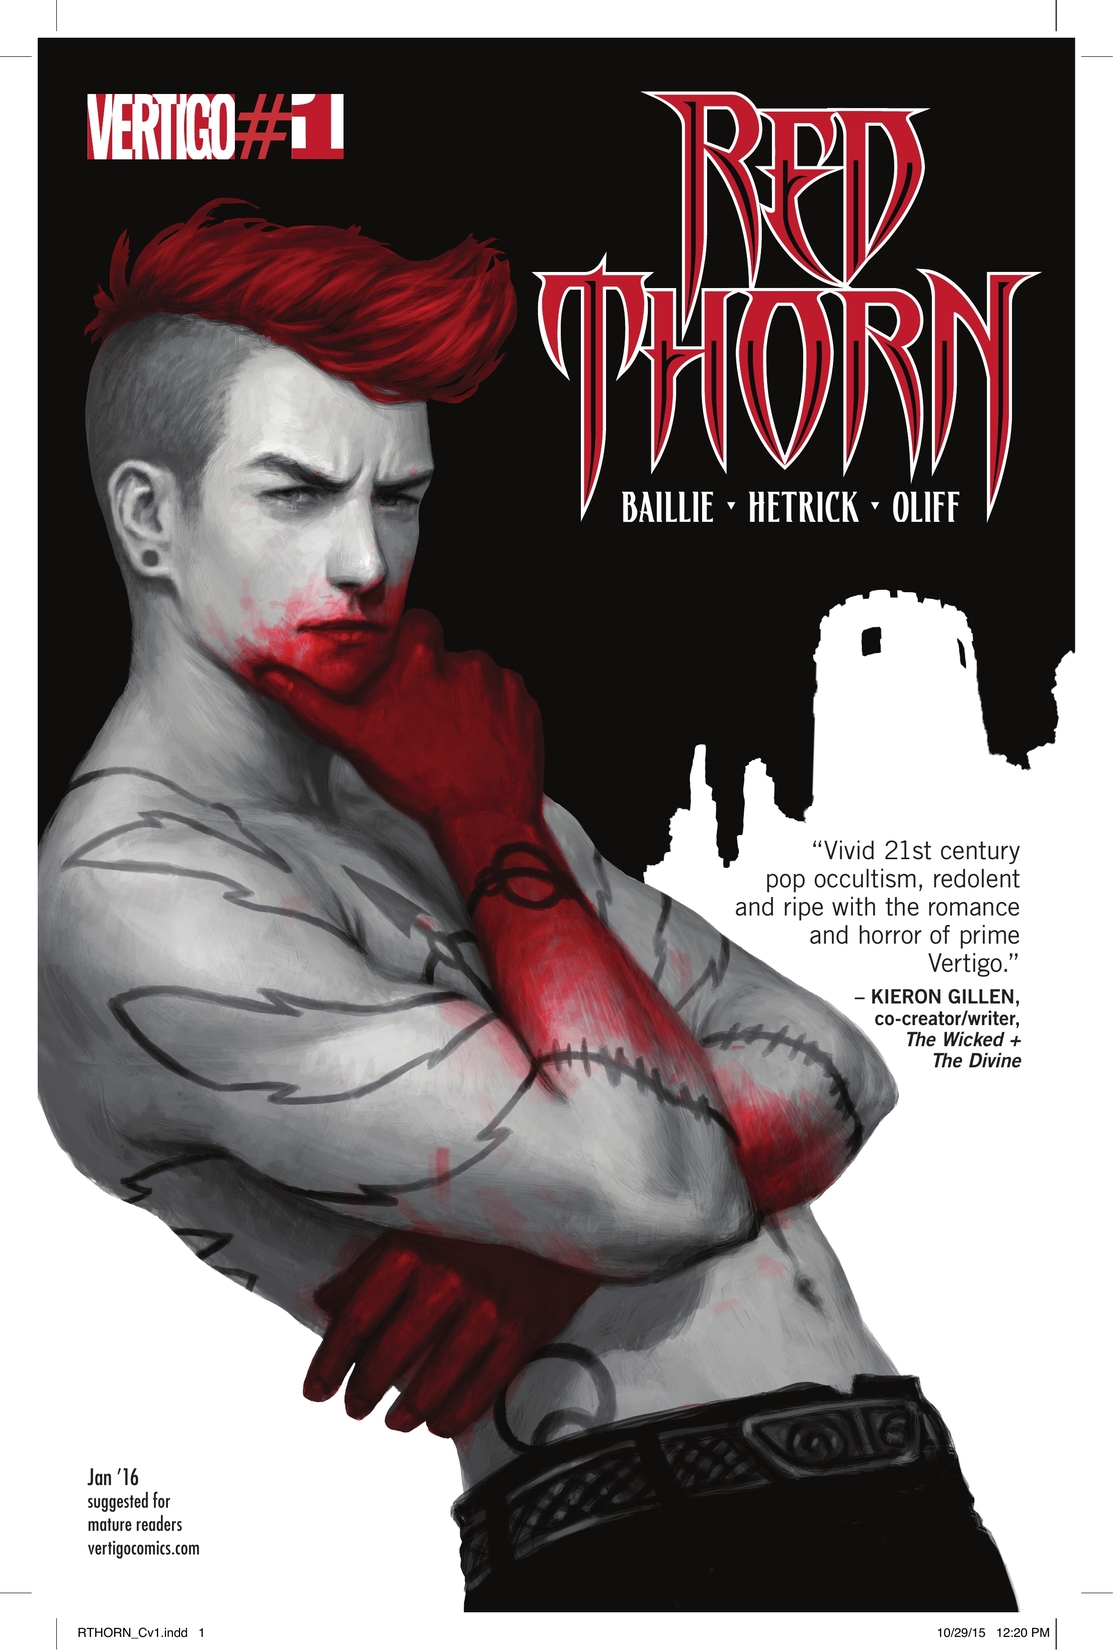 Red Thorn #1 preview images